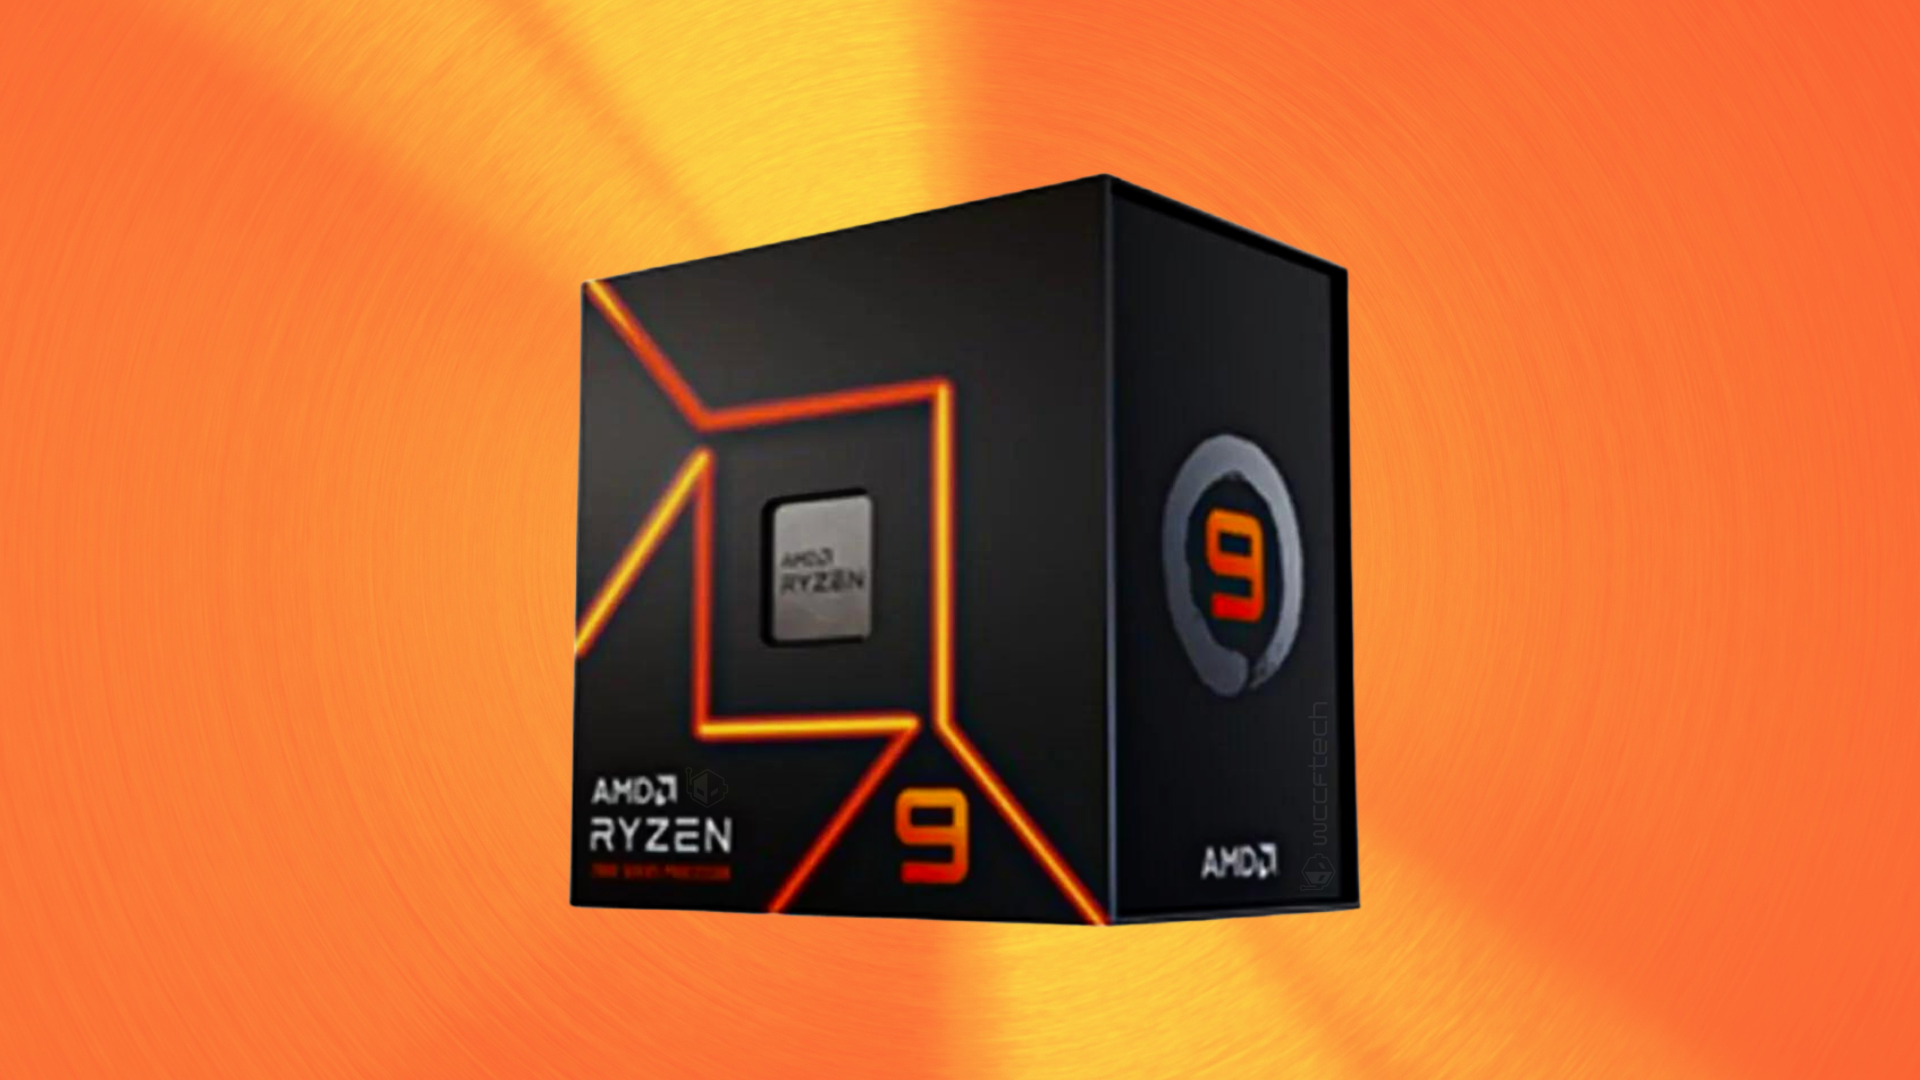 Ryzen 9 7900X has fallen in price in China so much that it is now more profitable than Ryzen 9 7900